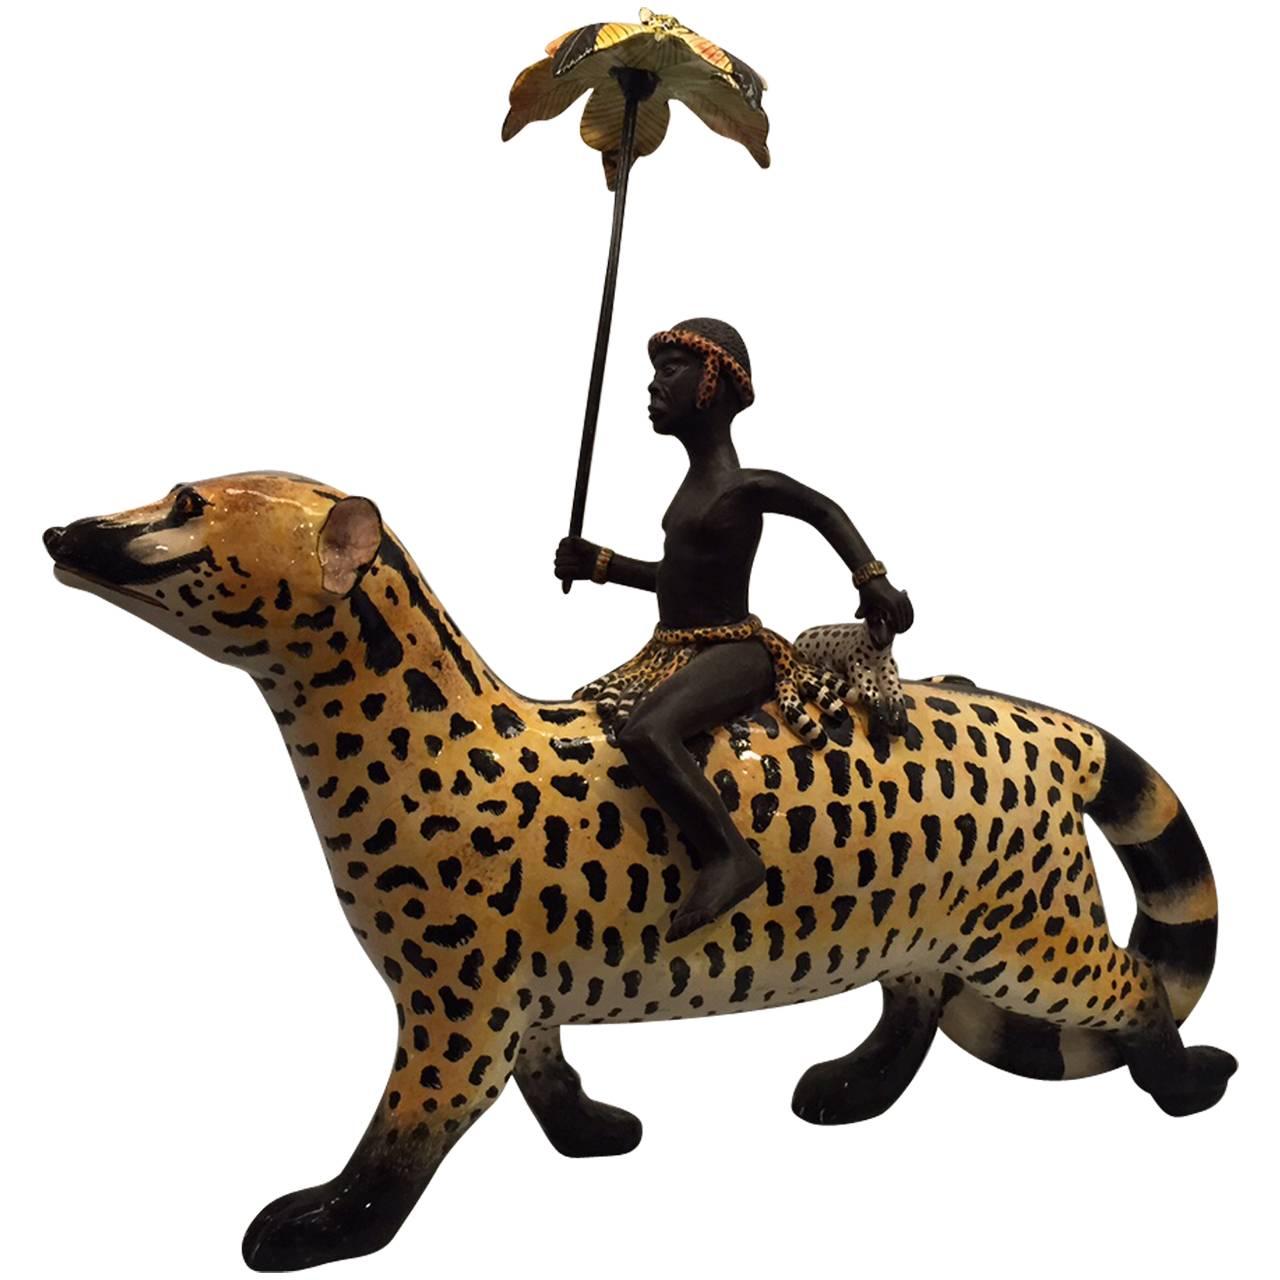 Ardmore South African Ceramic Rider with Parasol on a Wild Dog